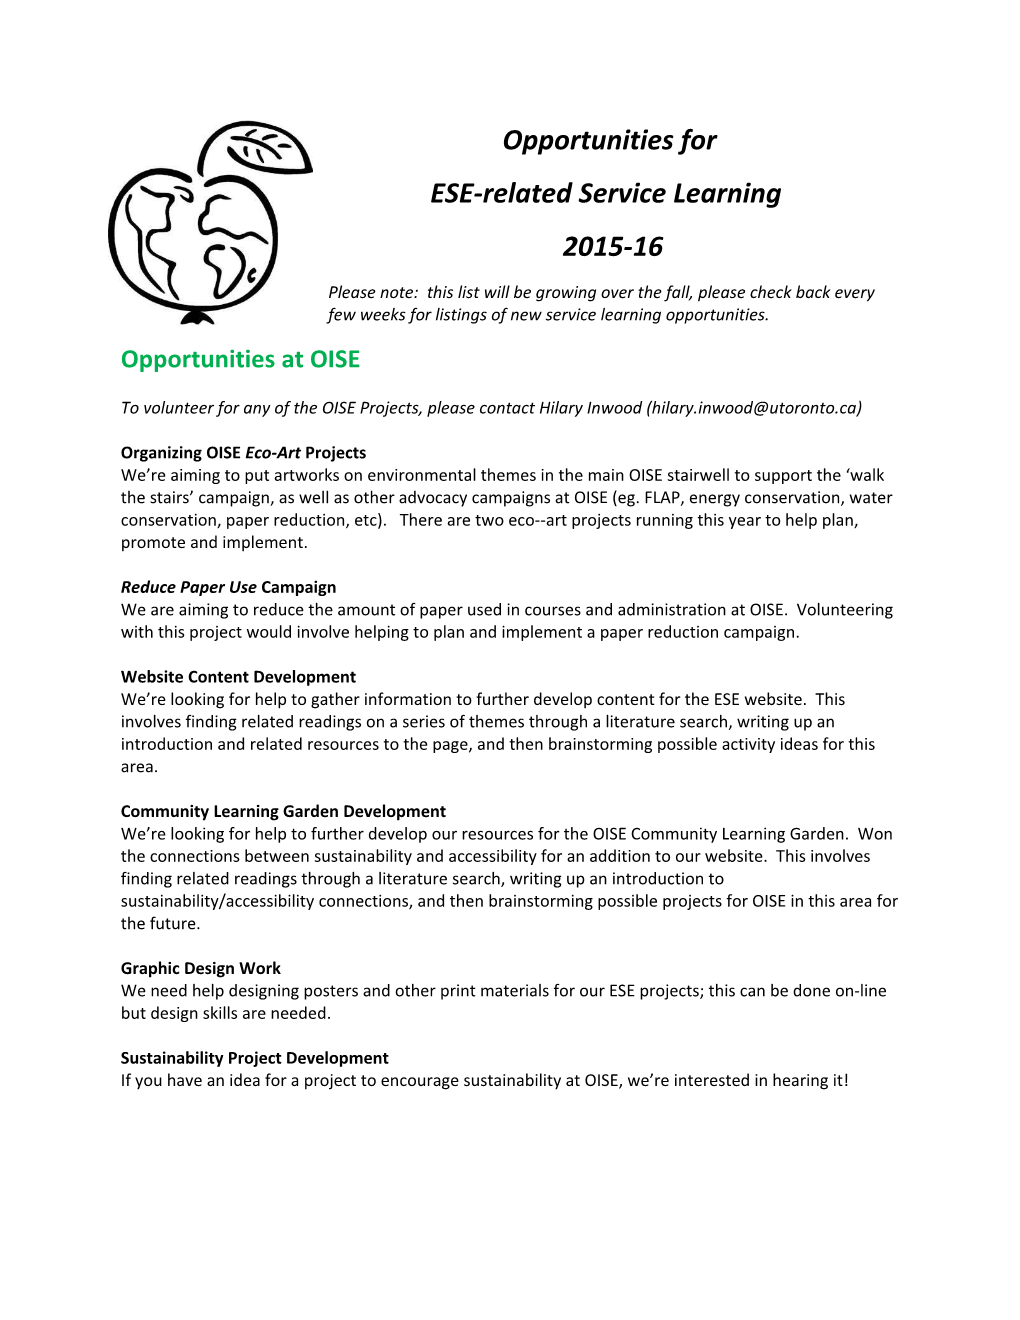 ESE-Related Service Learning